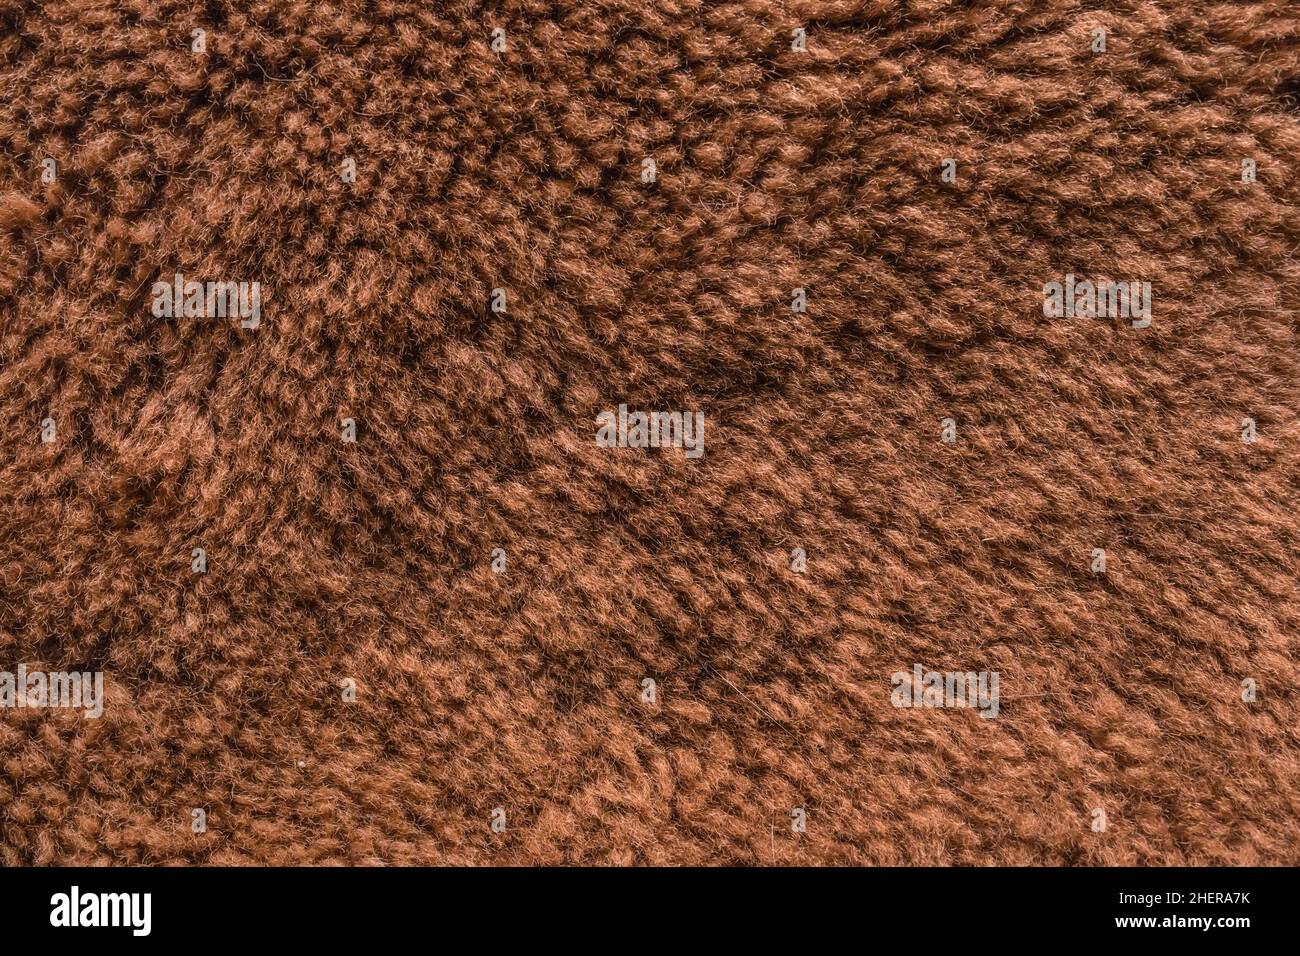 Brown natural fur or wool surface texture animal skin background. Stock Photo